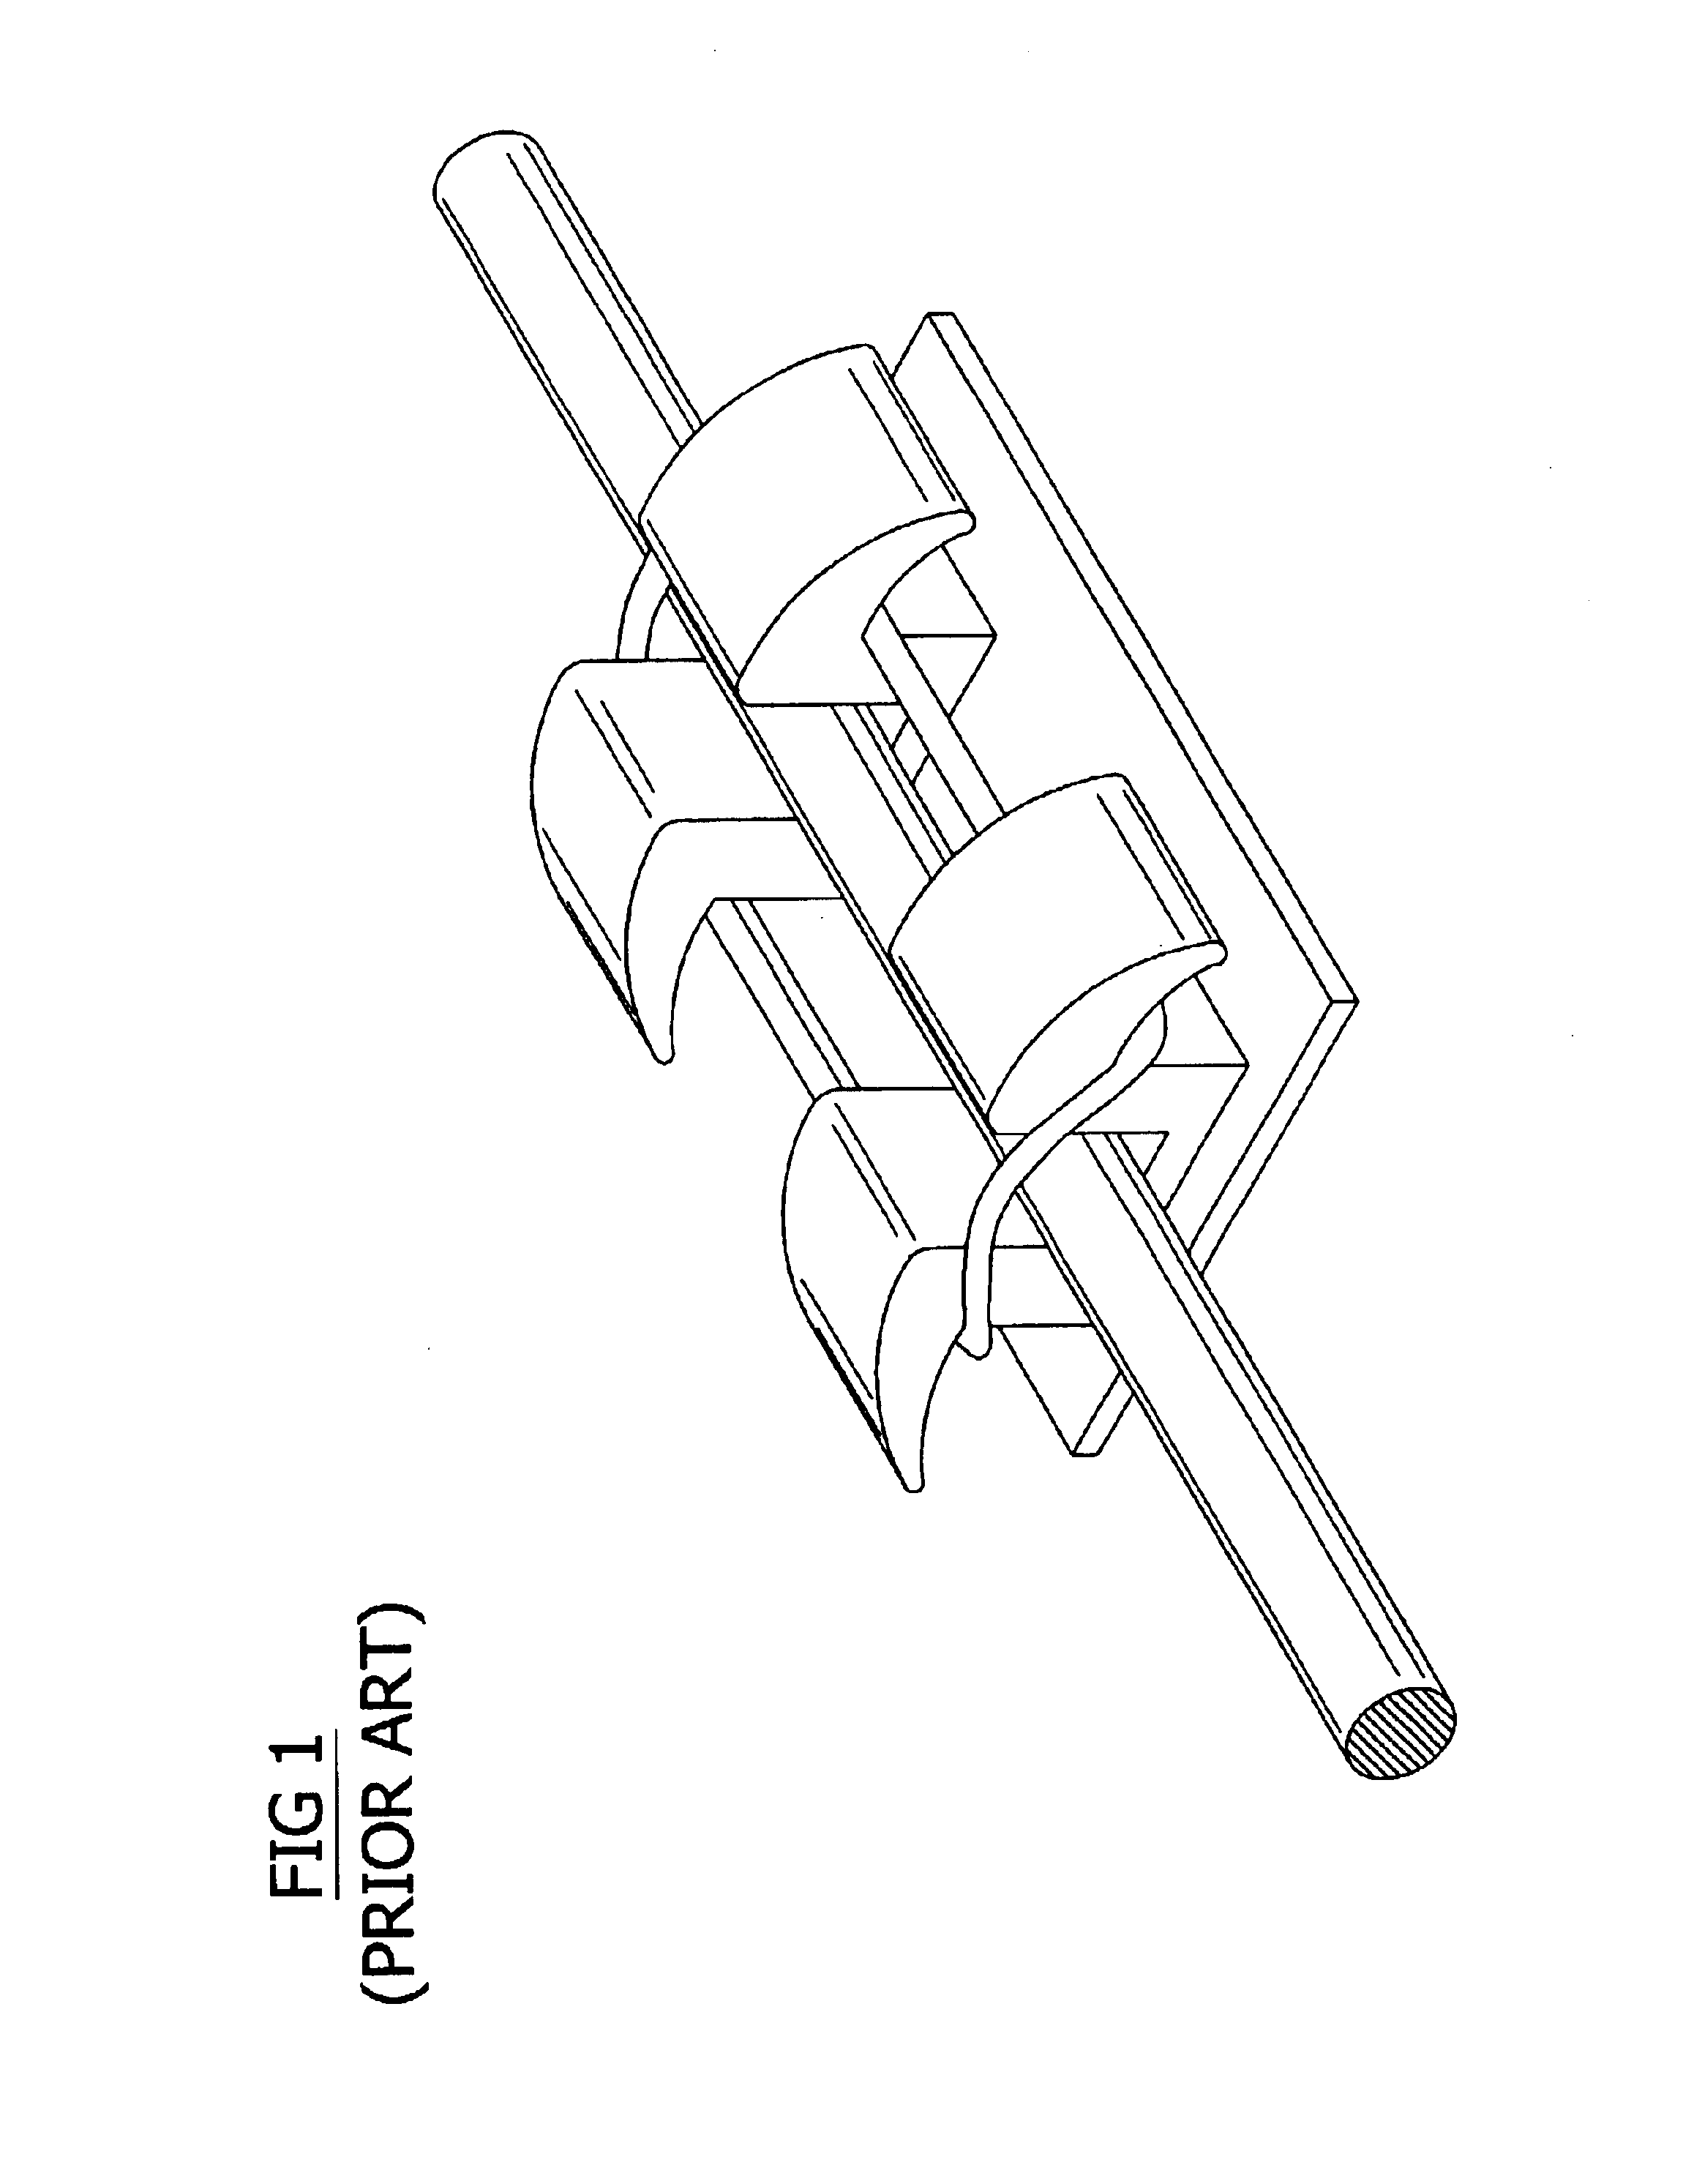 Orthodontic bracket and positioning system